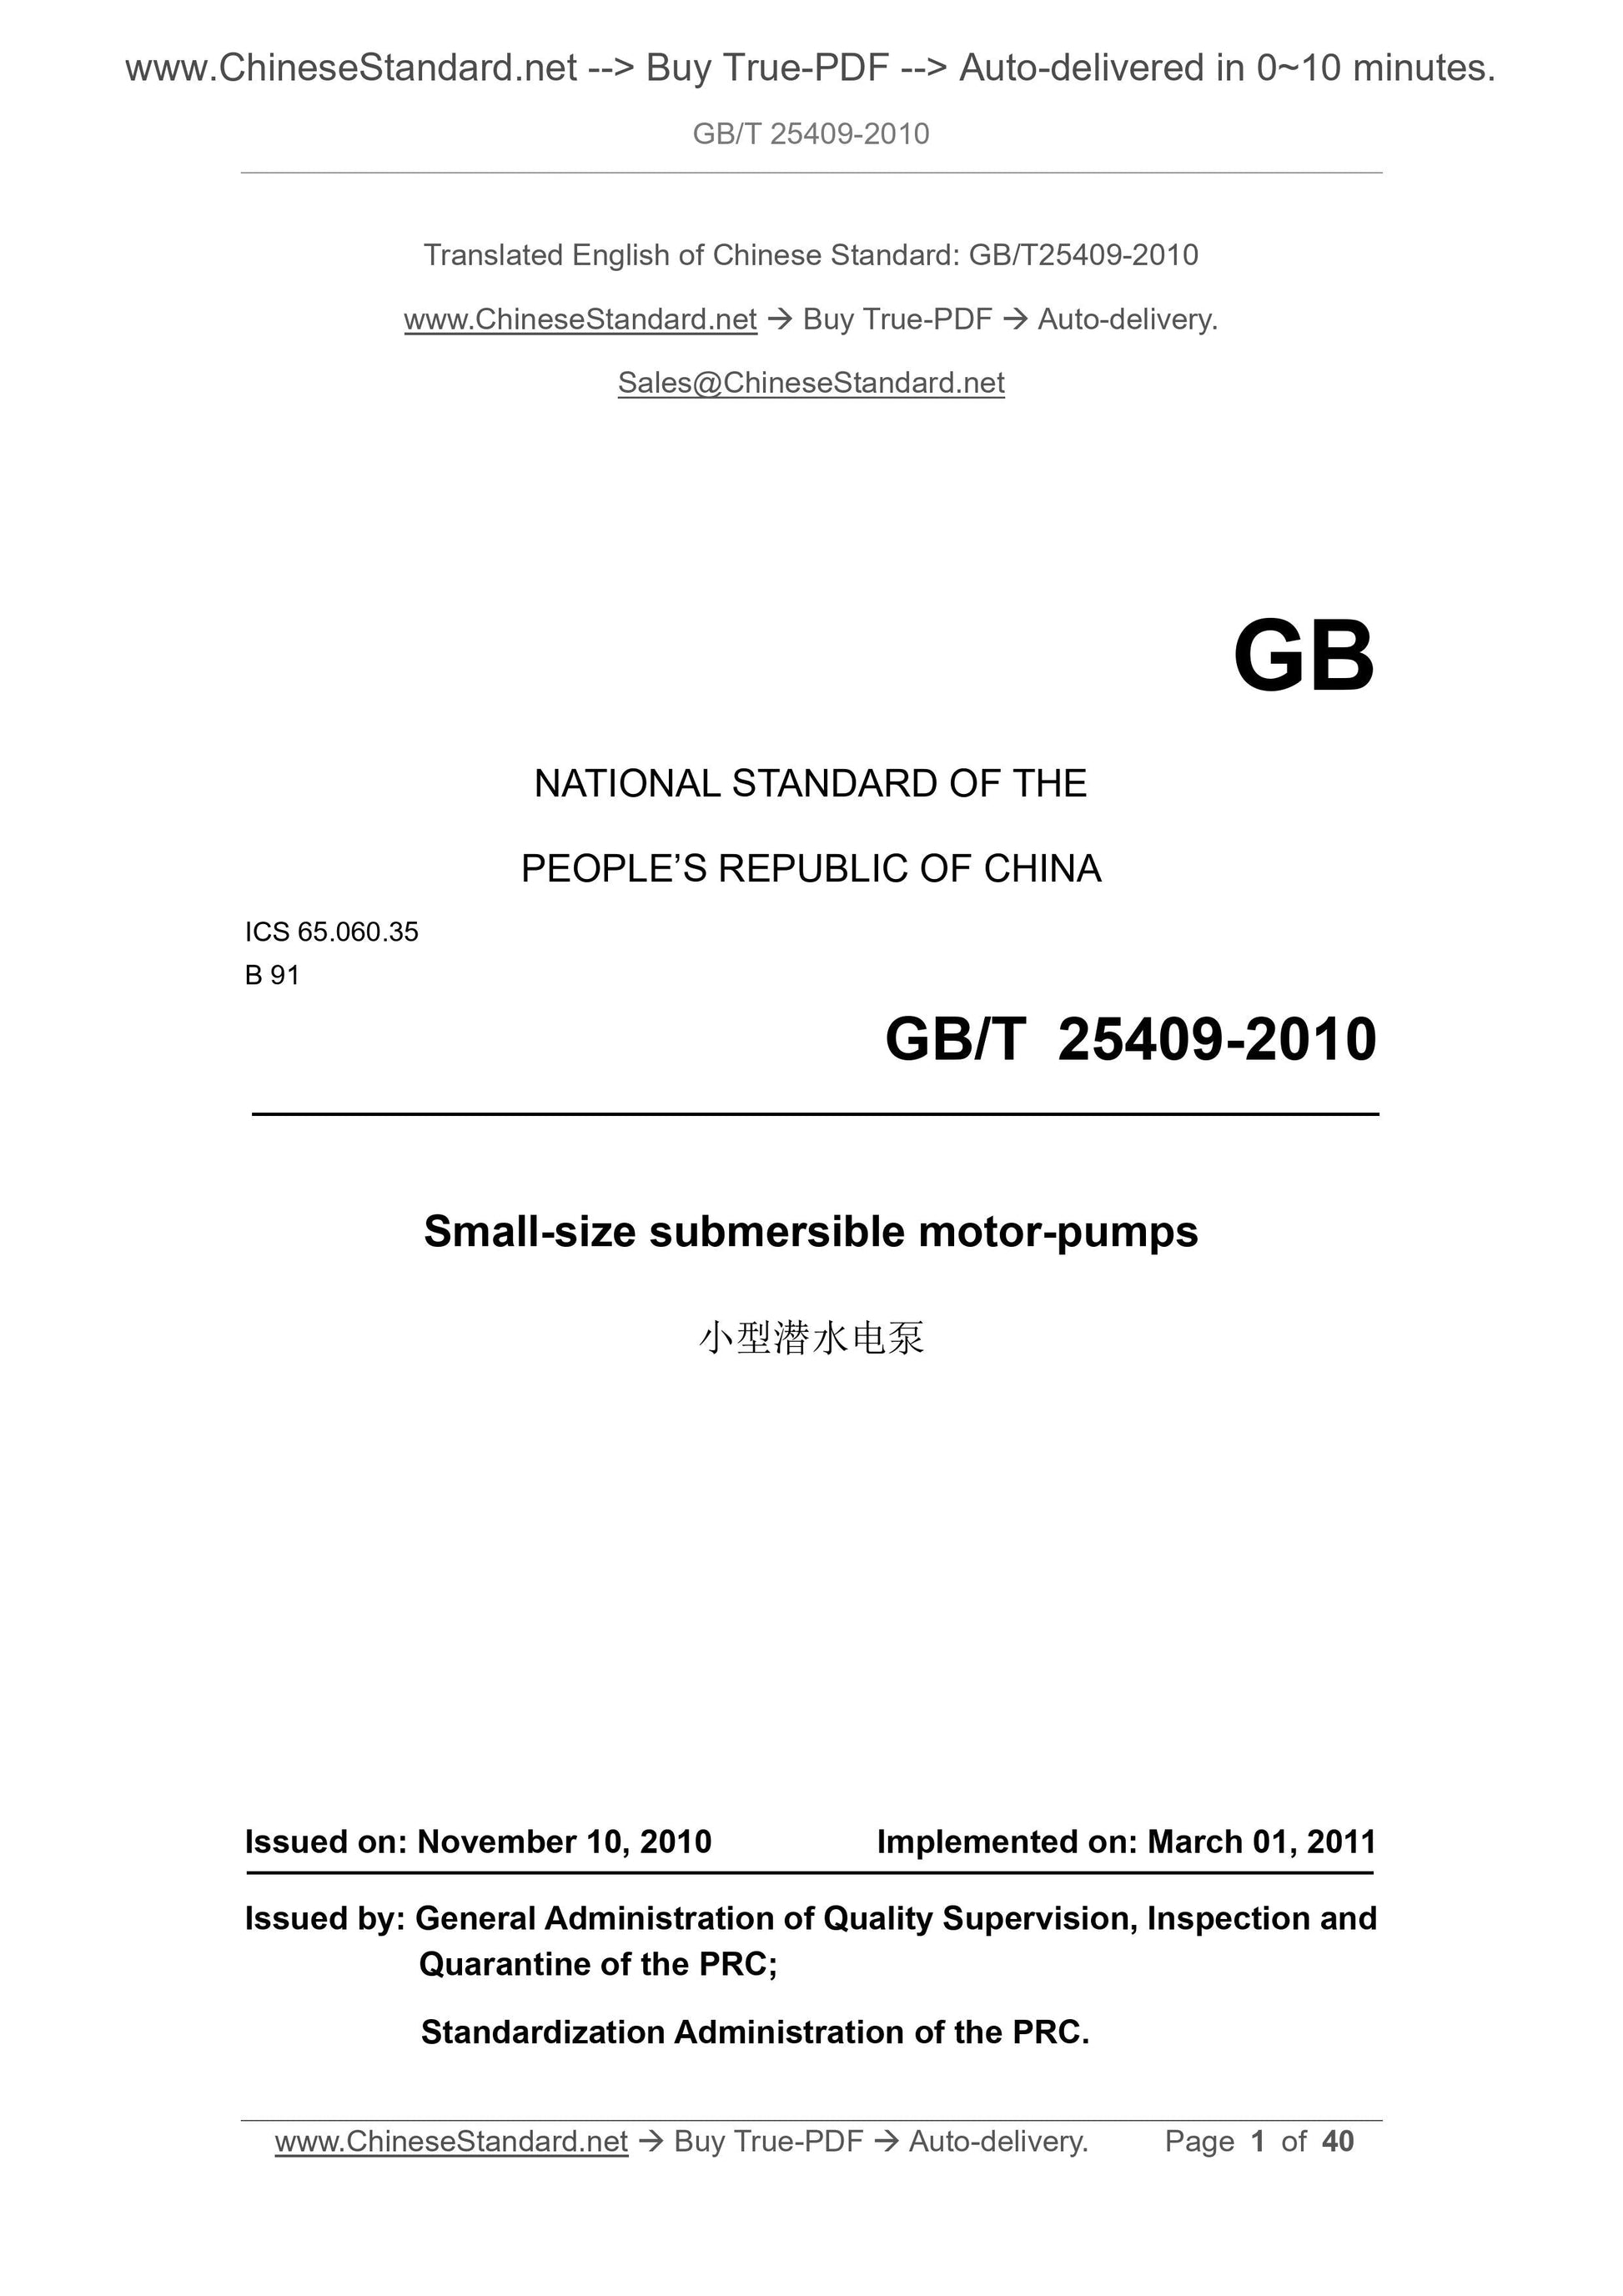 GB/T 25409-2010 Page 1